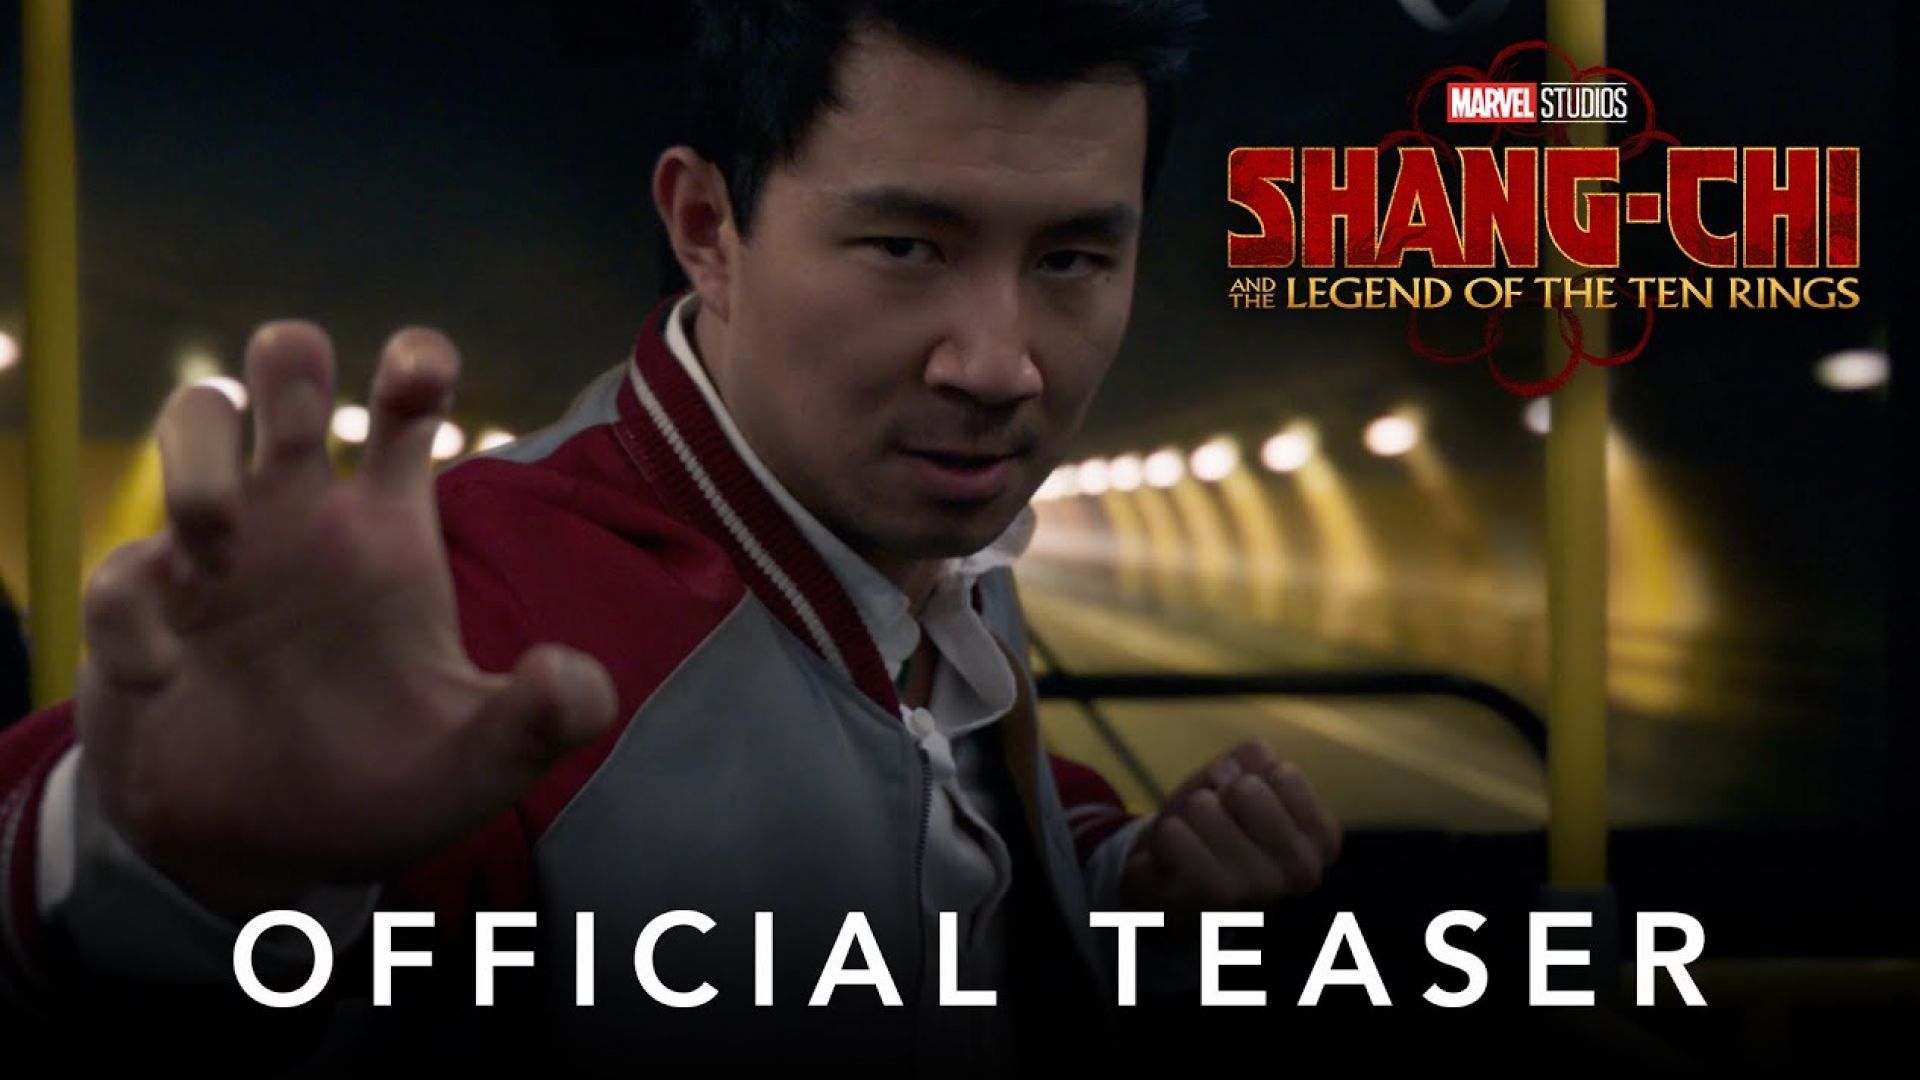 Shang-Chi and the Legend of the Ten Rings trailer